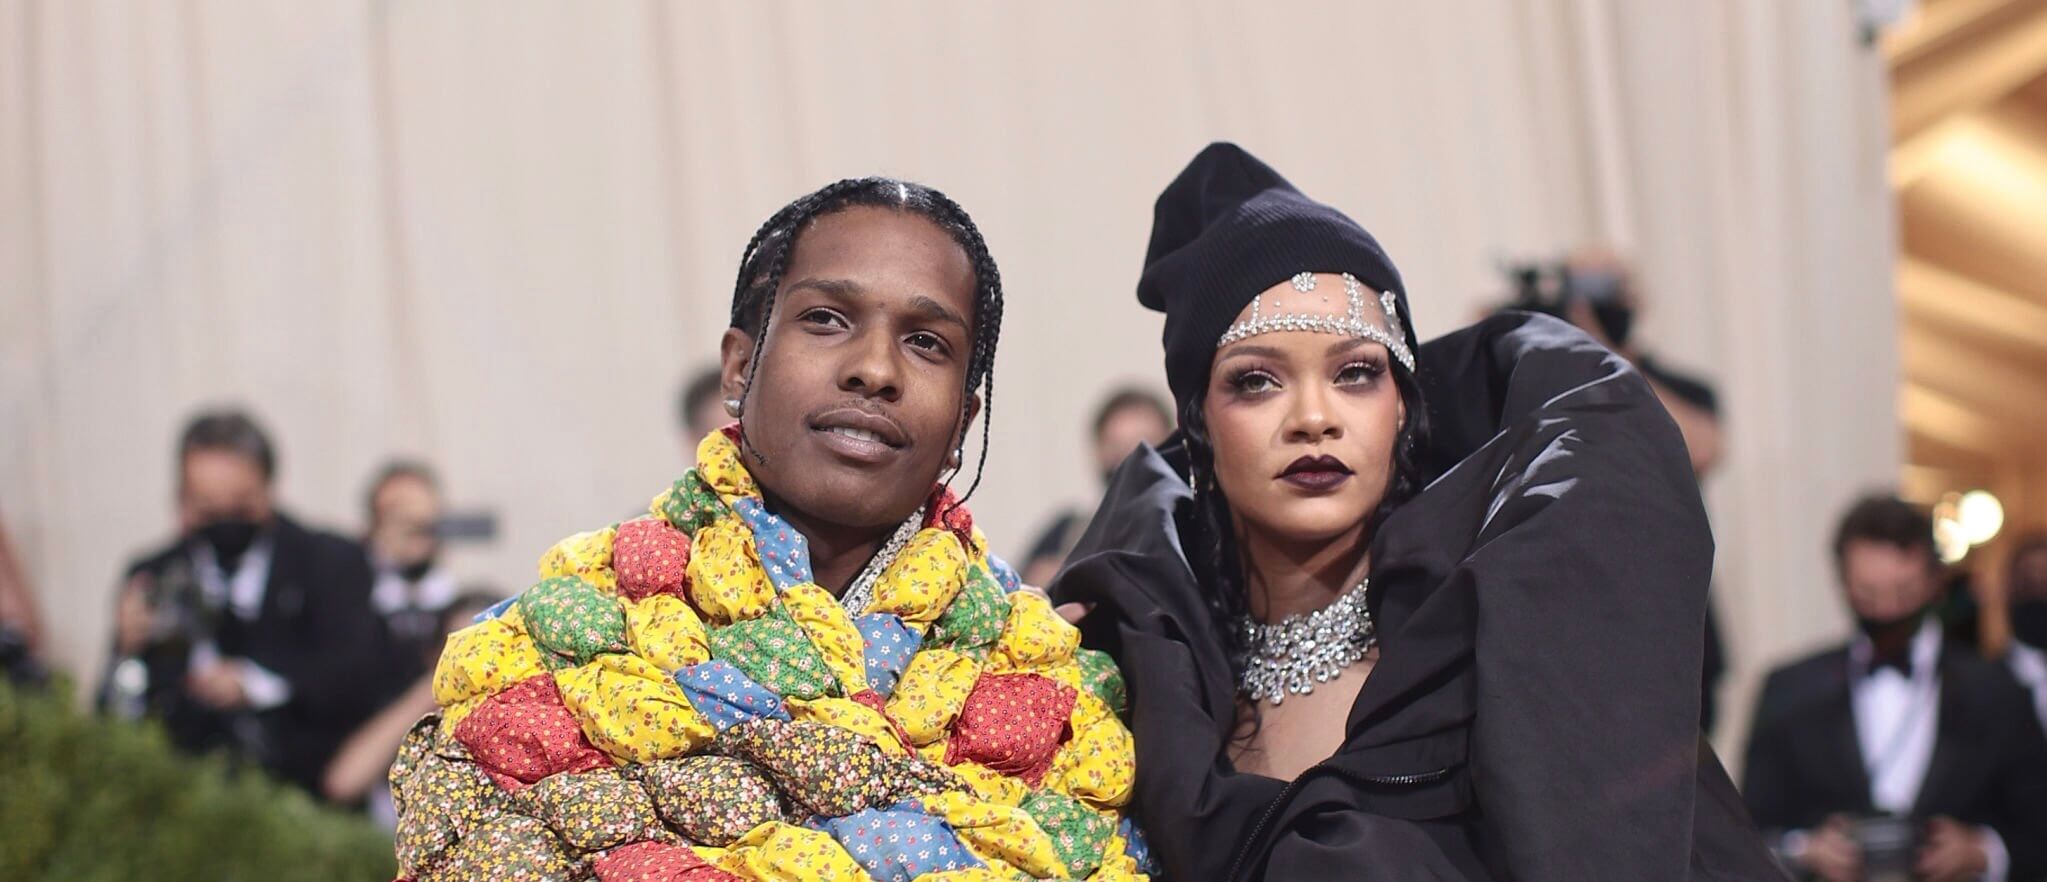 Rihanna, A$AP Rocky’s Second Son’s Name Revealed, Birth Certificate Surfaces